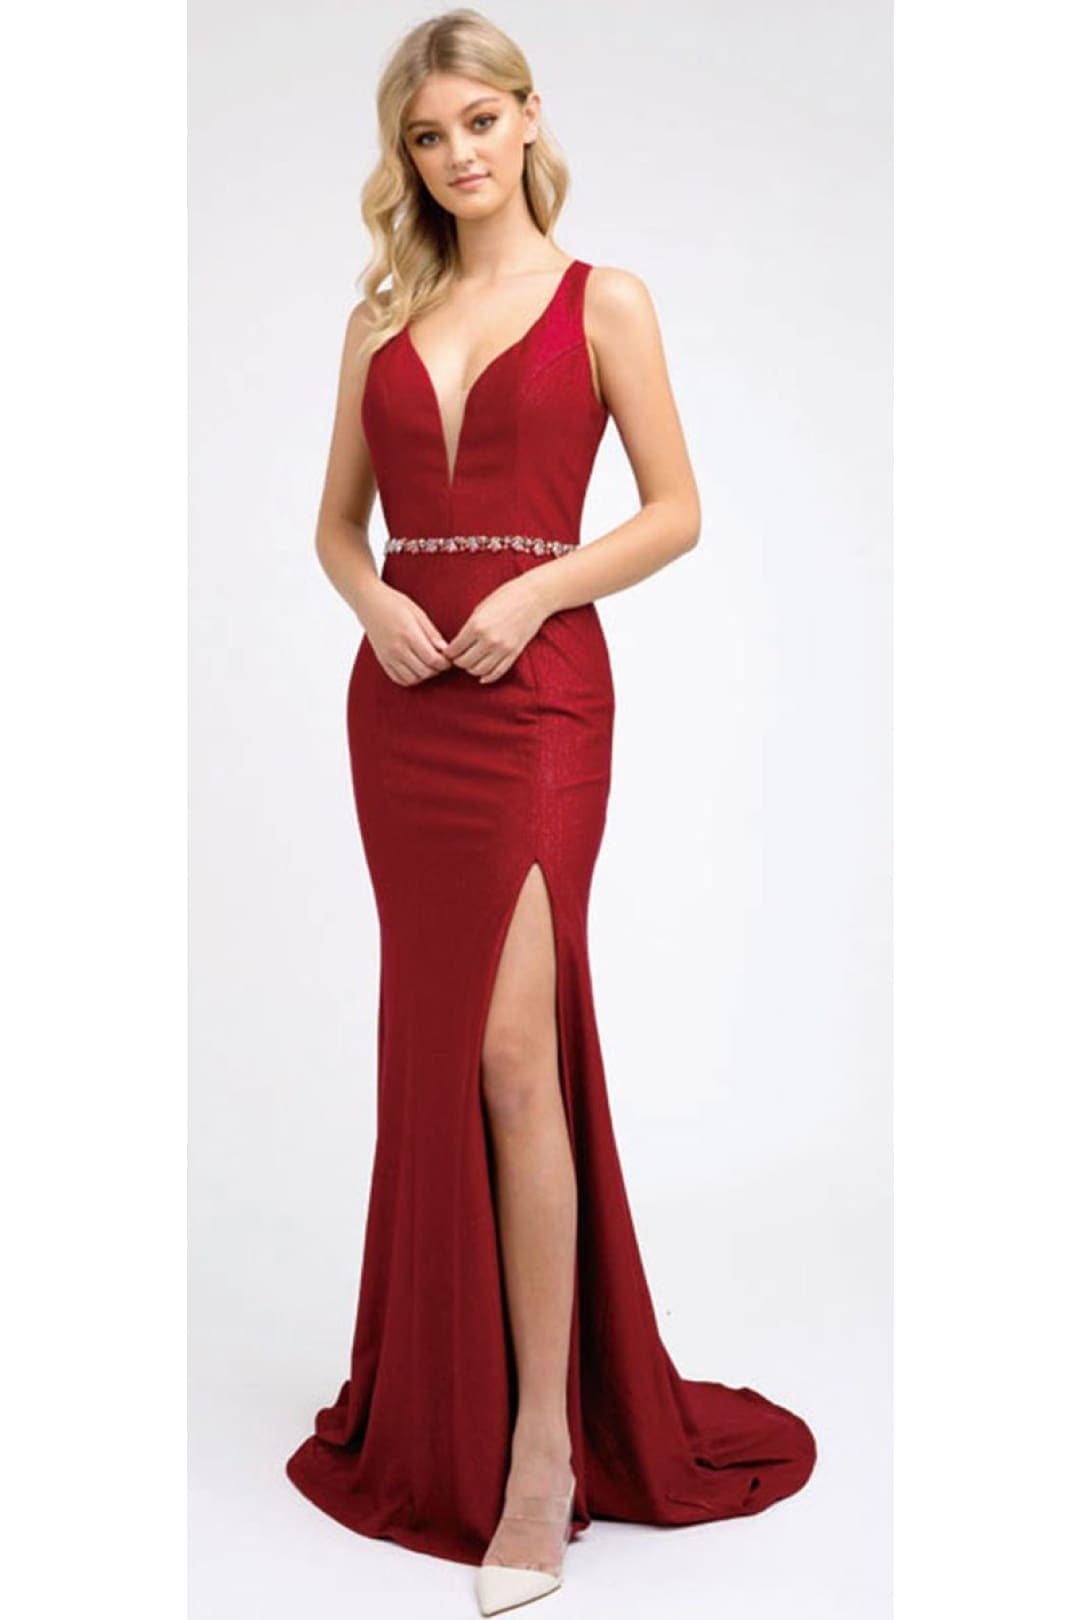 Strappy Formal Evening Gown - BURGUNDY / XS